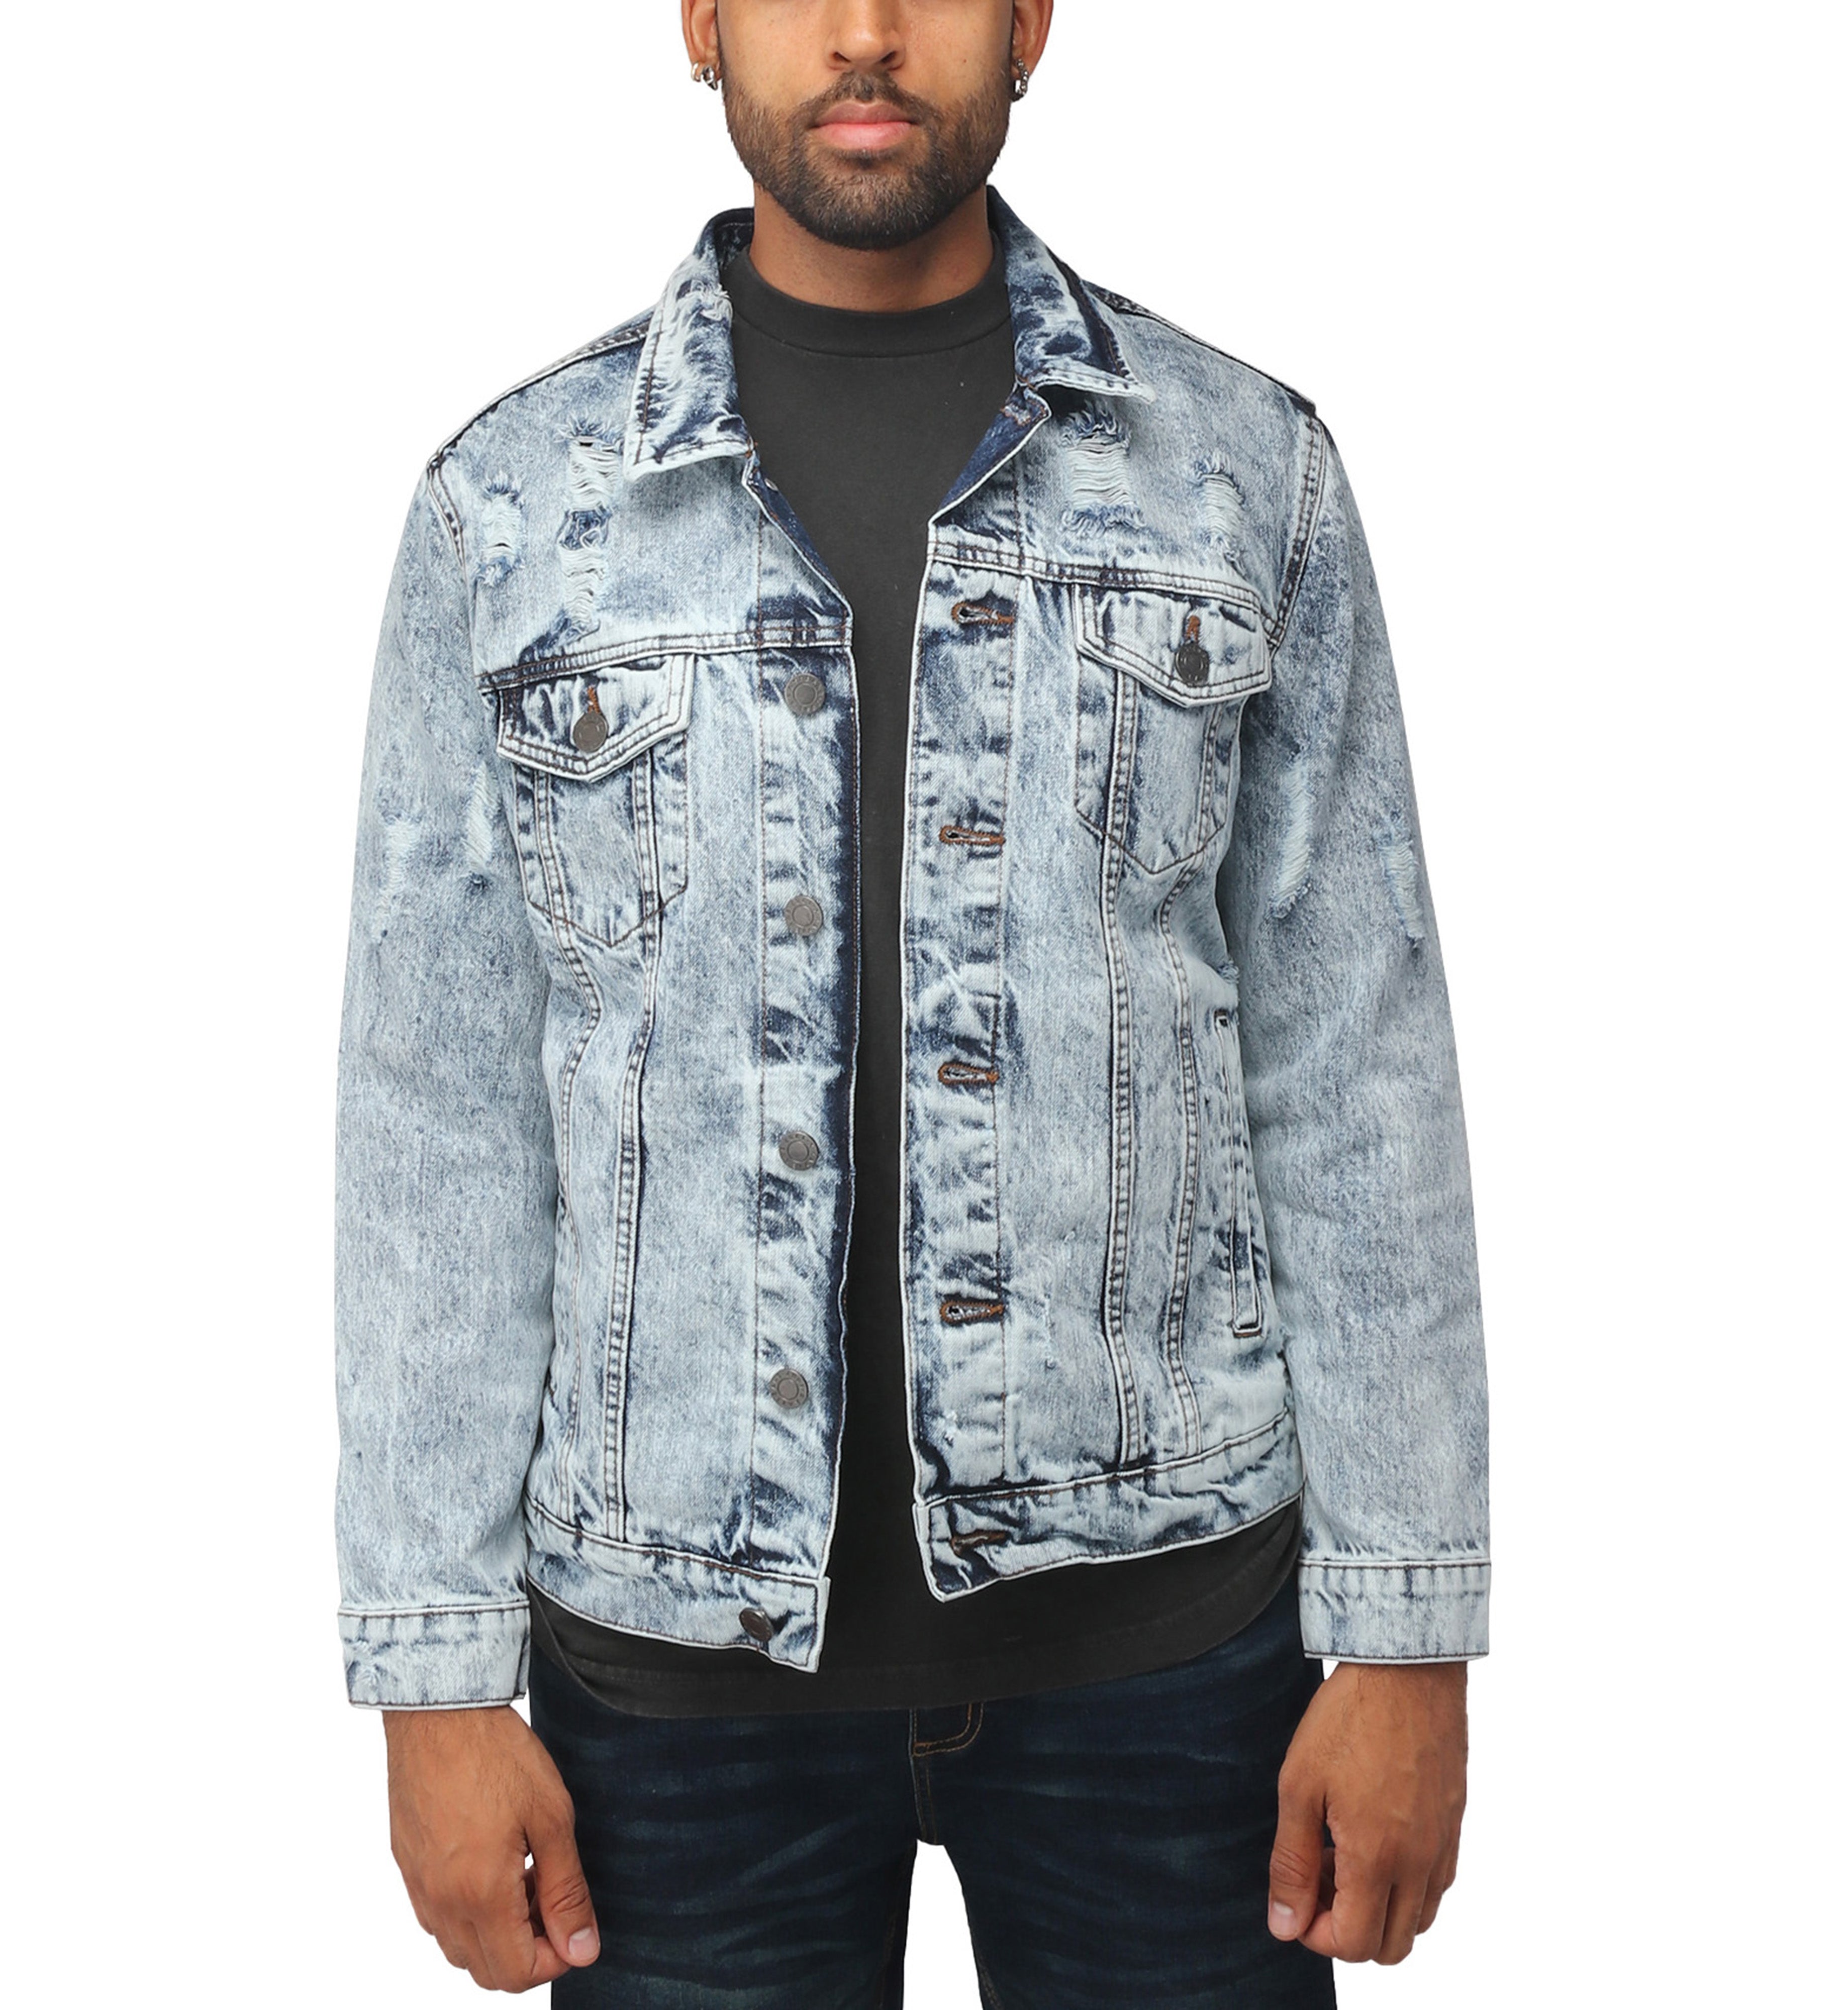 Port Authority Denim Jacket Style J7620 - Casual Clothing for Men, Women,  Youth, and Children